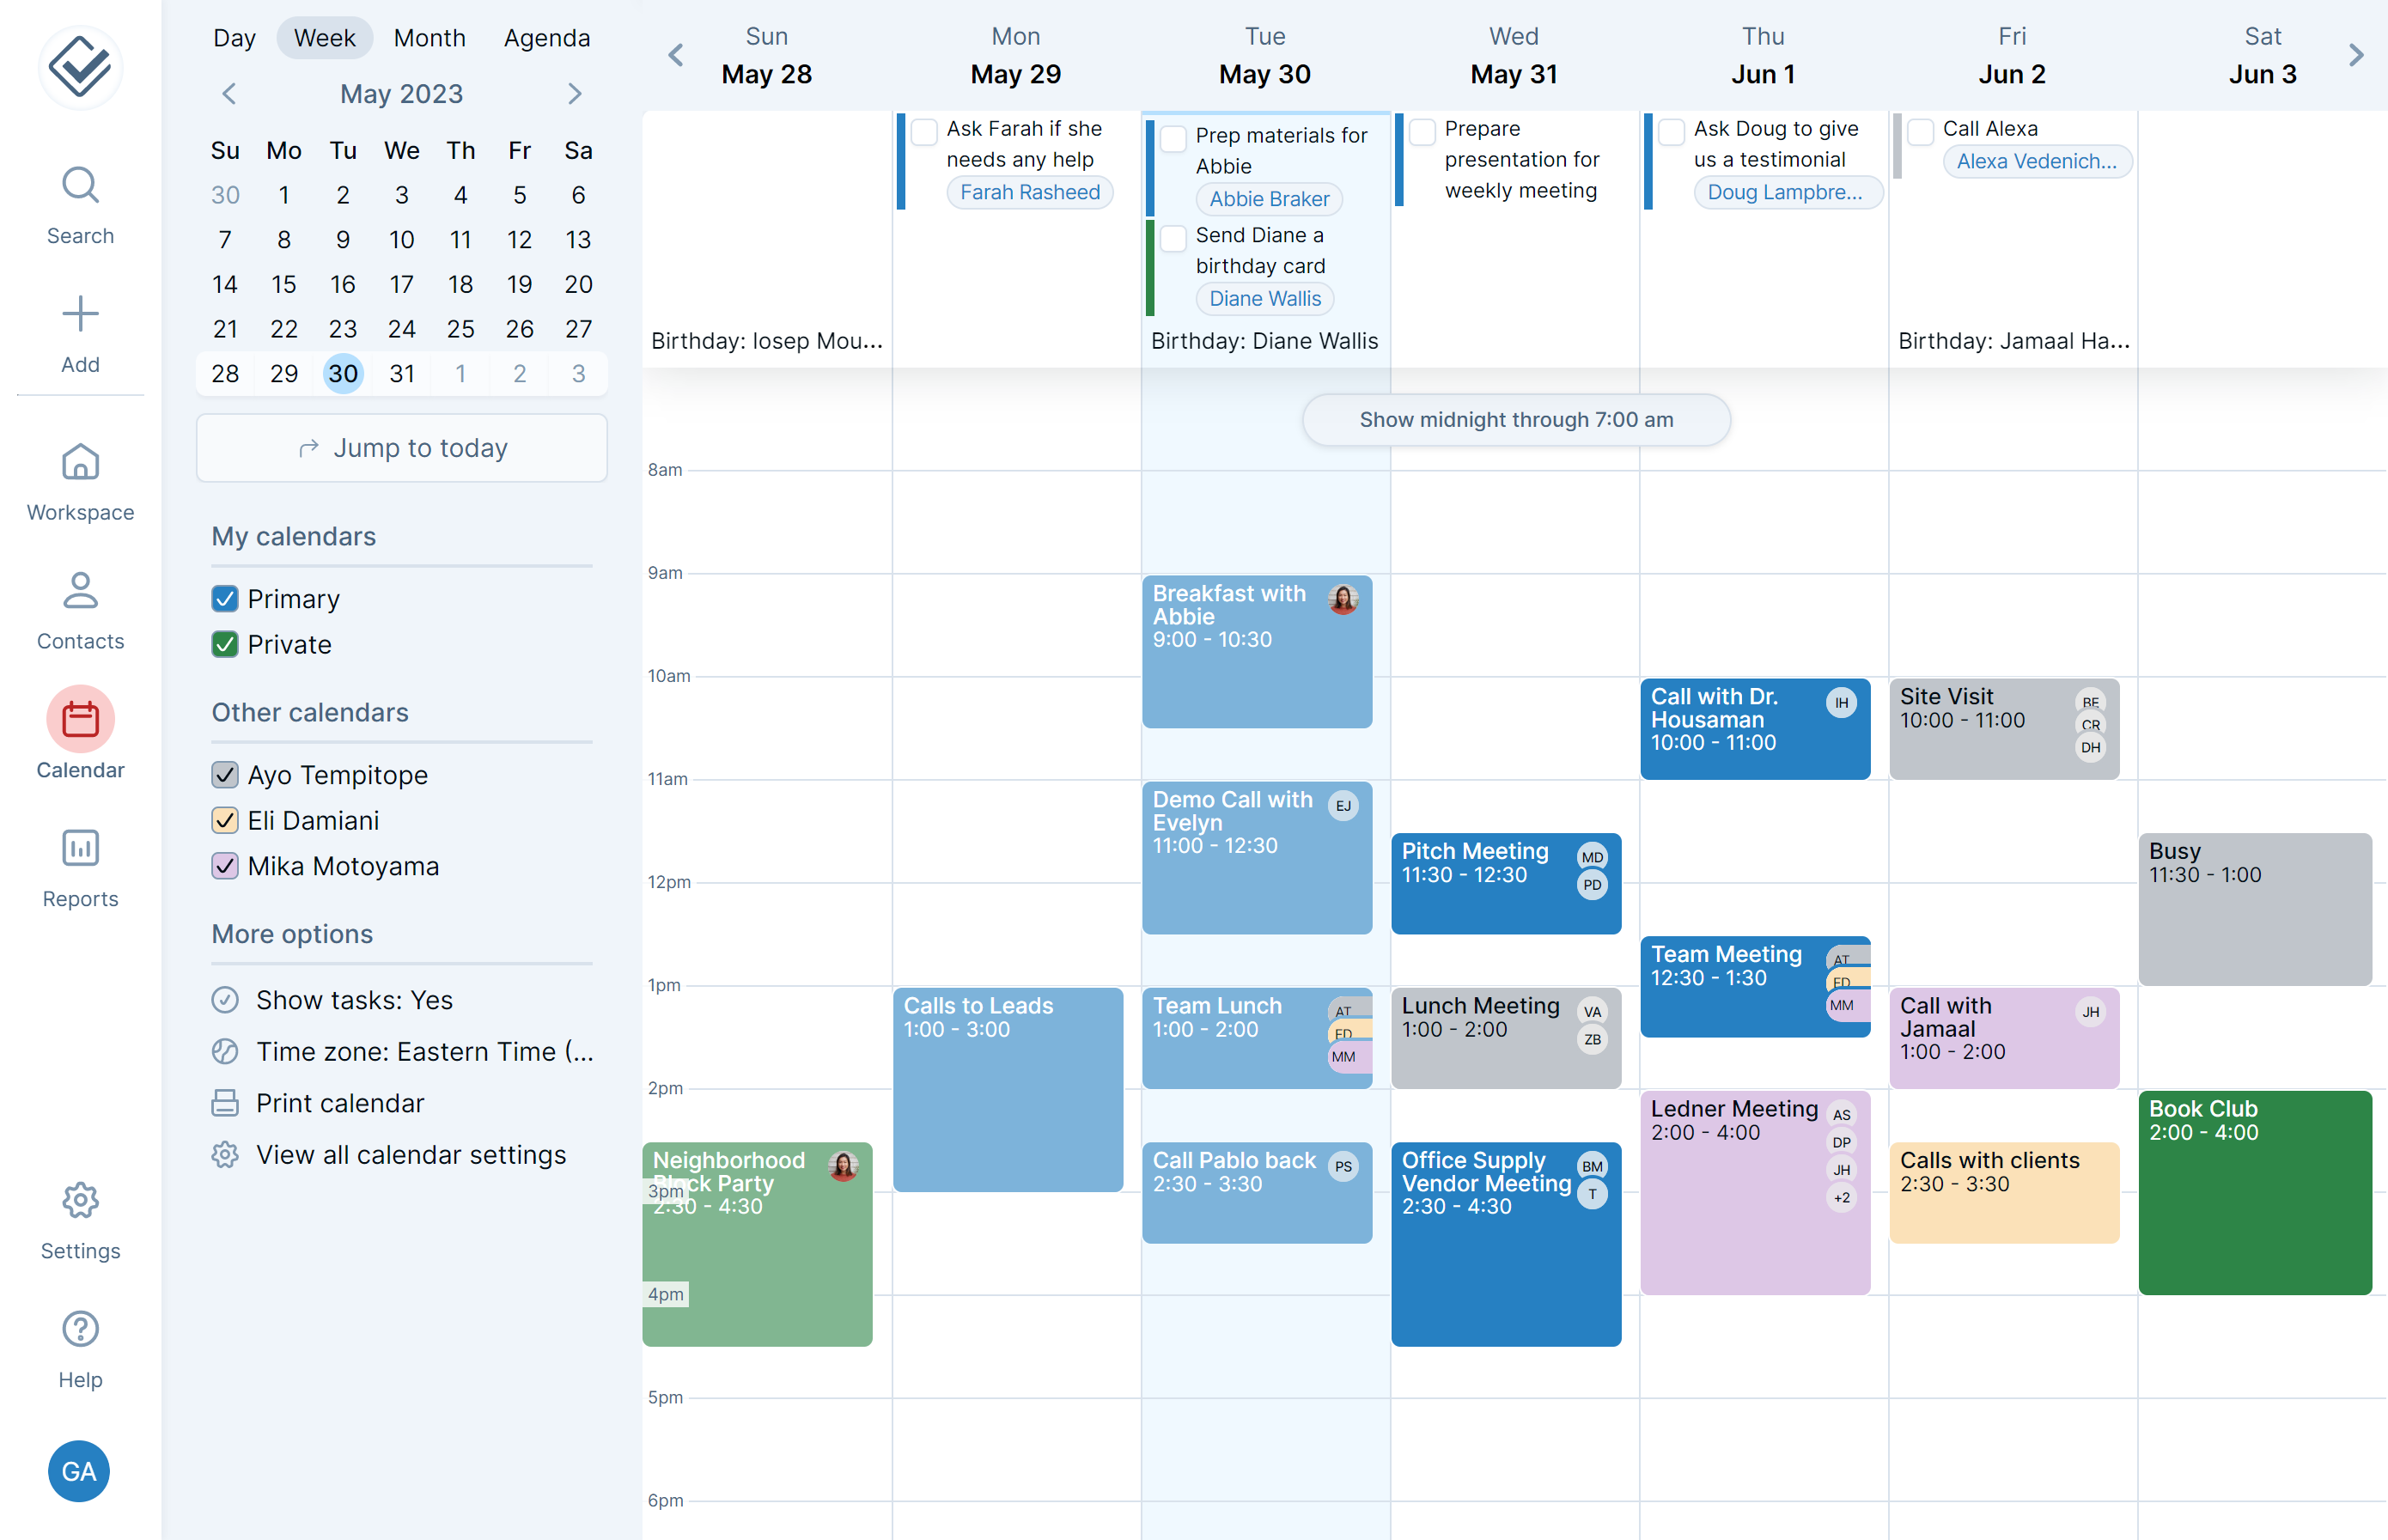 Calendar - private, shared, team calendars allow you to delegate tasks and events to one another, collaborate, and see what everyone is working on. Integrates with your Google and Outlook calendars.